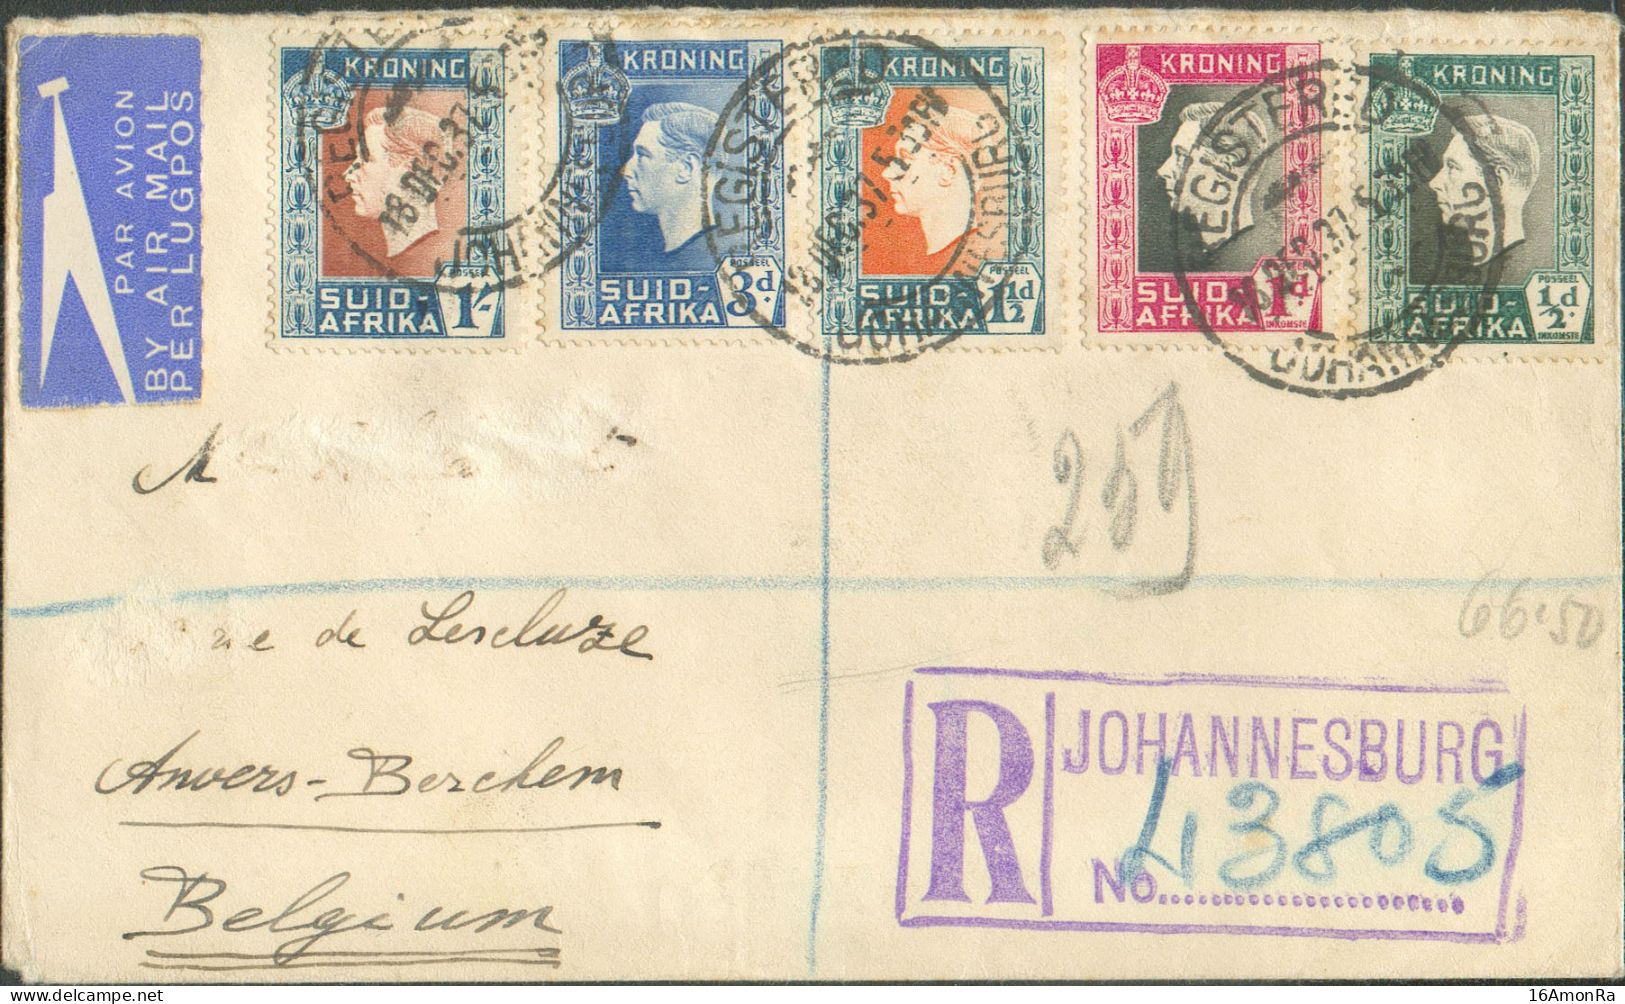 By Airmail Cover Franked 1s/6p. Canc. REGISTERED JOHANNESBURG 18 Dec. 1937 Registered To Anvers (Belgium)  - 20914 - Airmail